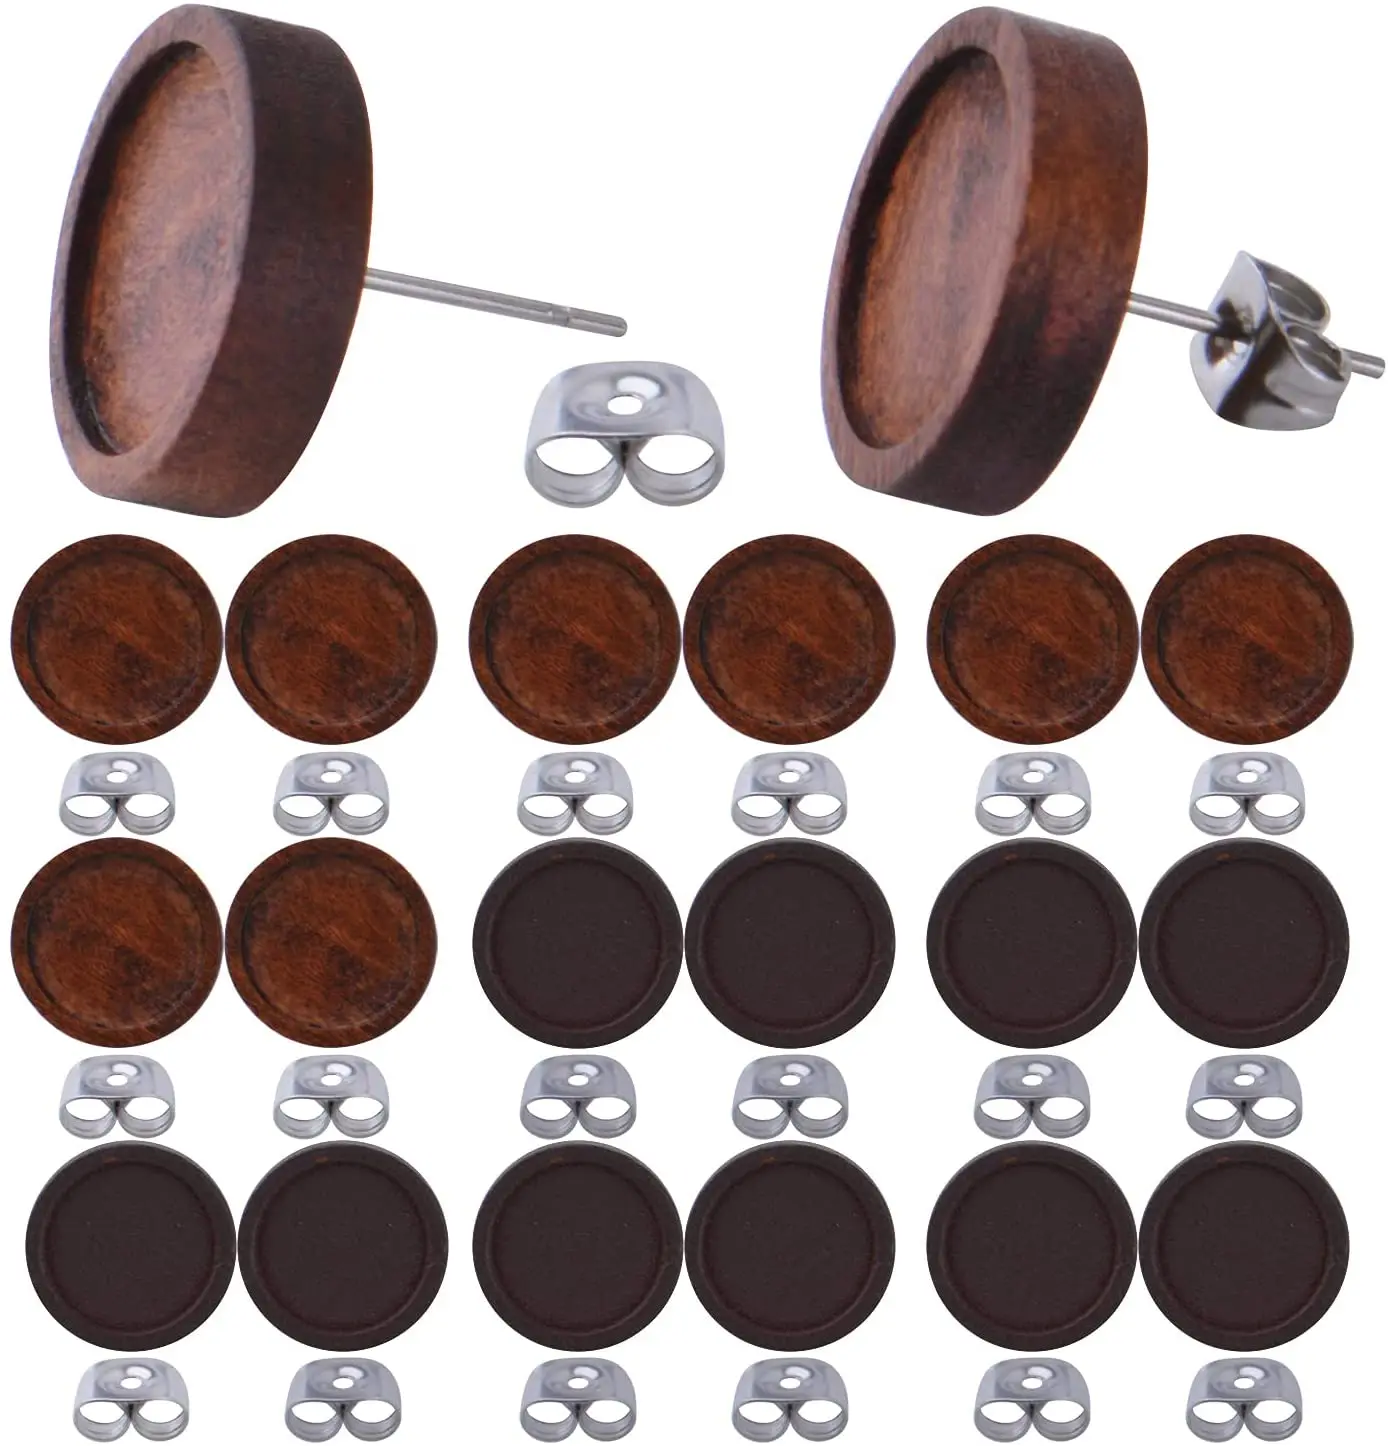 

20pcs Wood Stainless Steel Earring Cabochon Blanks Round Bezel Tray Ear Studs with 20pcs Butterfly Ear Backs for Jewelry Making